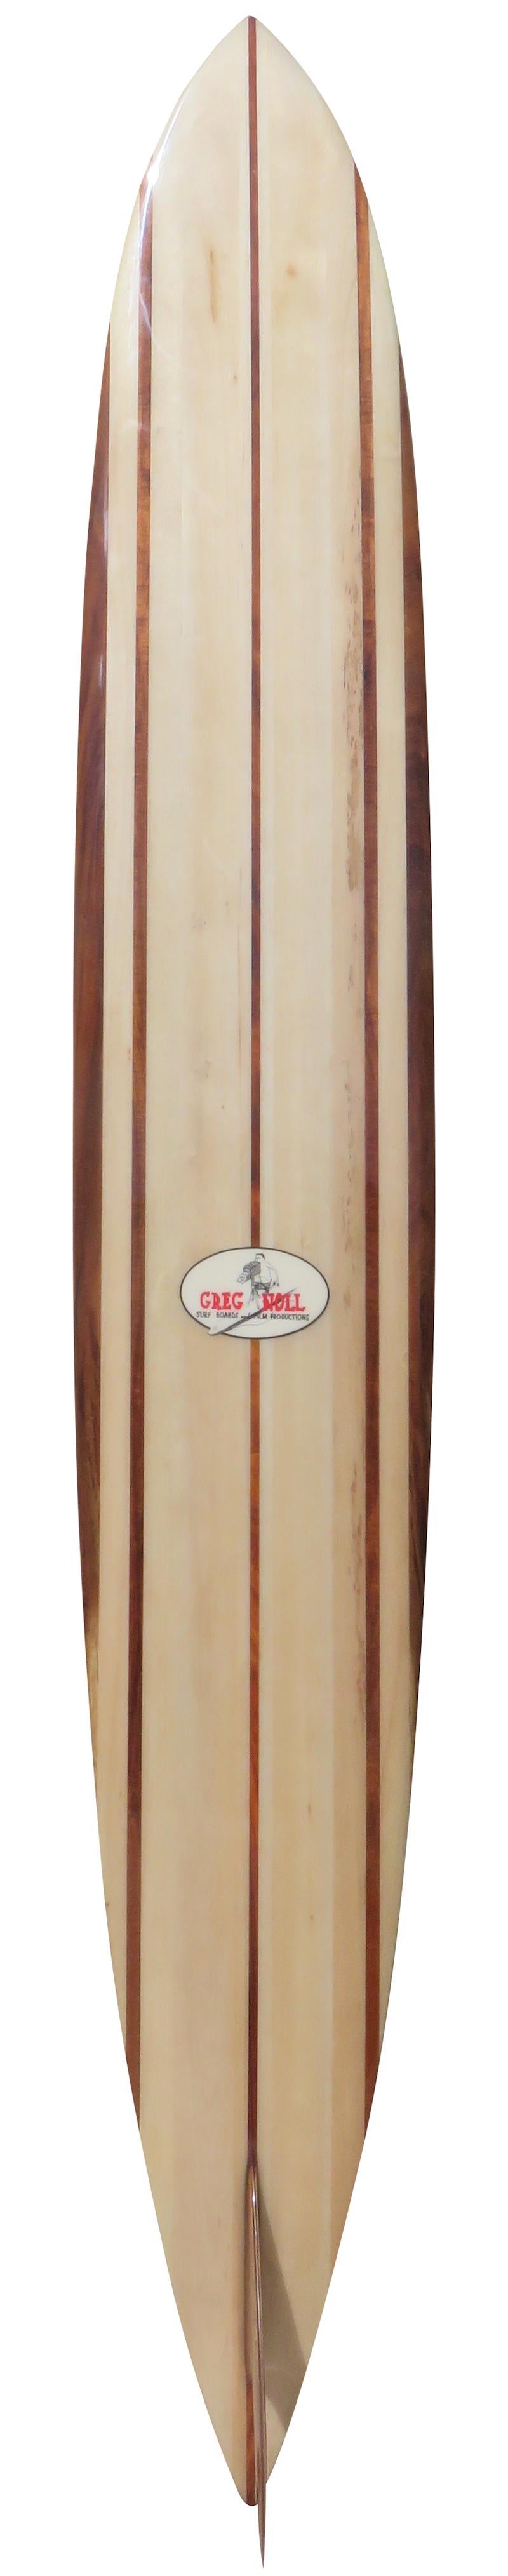 Mid-1980s Greg Noll shaped Jose Angel model balsawood and redwood big wave surfboard. Only 25 Jose Angel surfboards were made of wood making this an especially rare surfboard. Featuring a pintail shape with triple redwood stringer and solid redwood